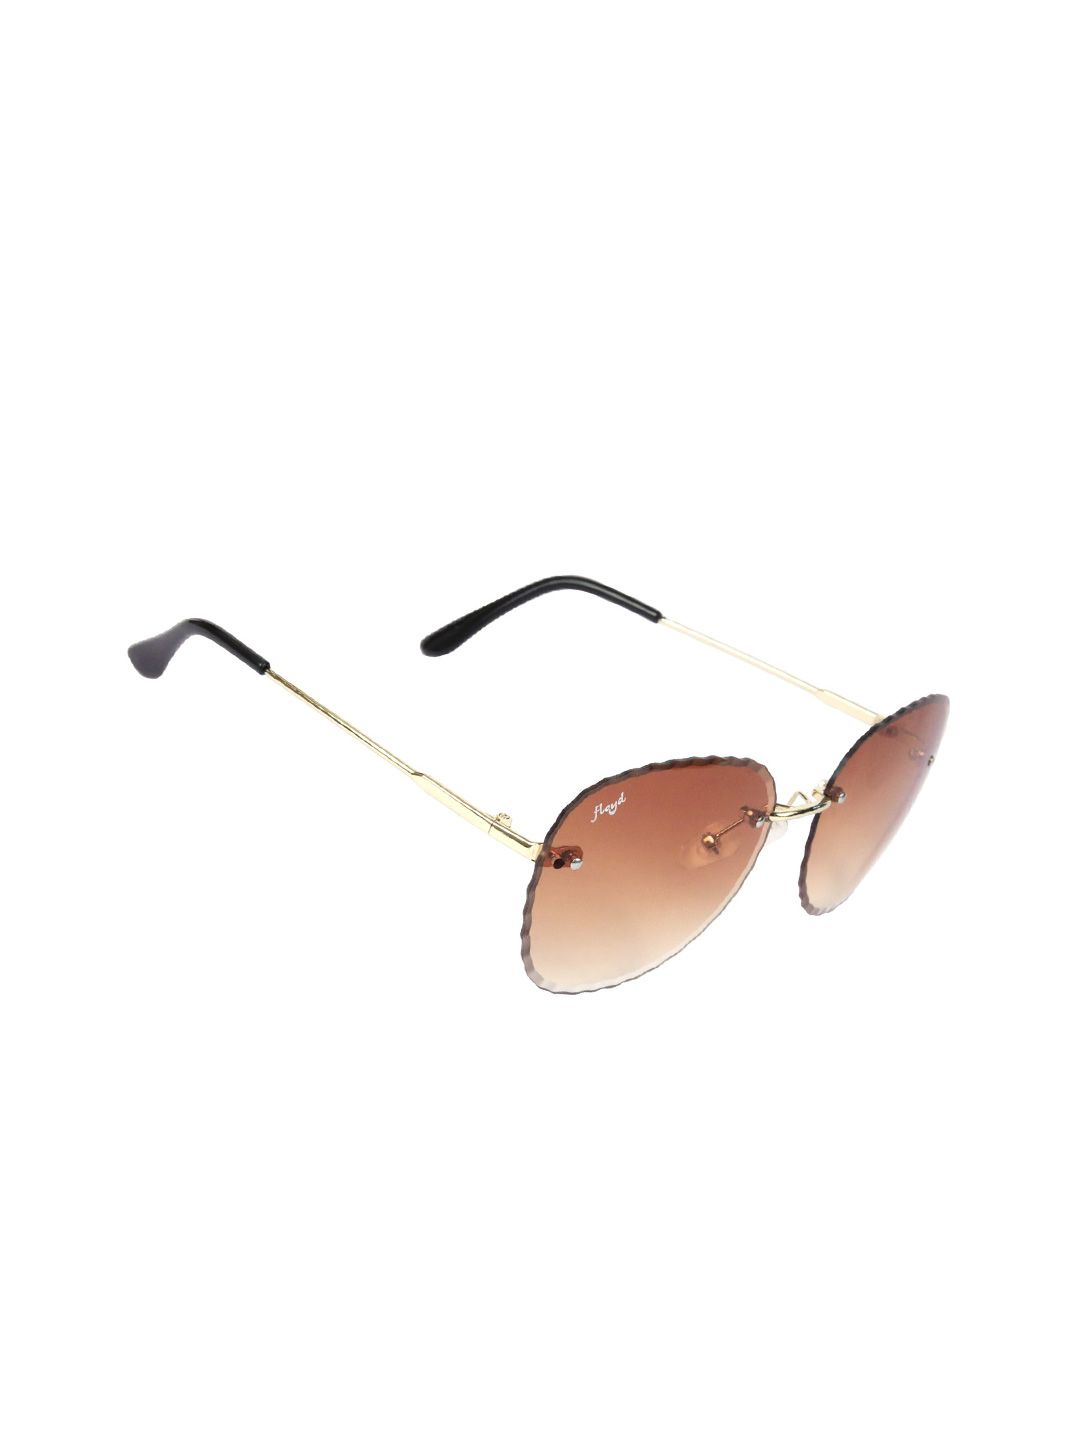 Floyd Unisex Brown Lens & Gold-Toned Aviator Sunglasses with UV Protected Lens Price in India